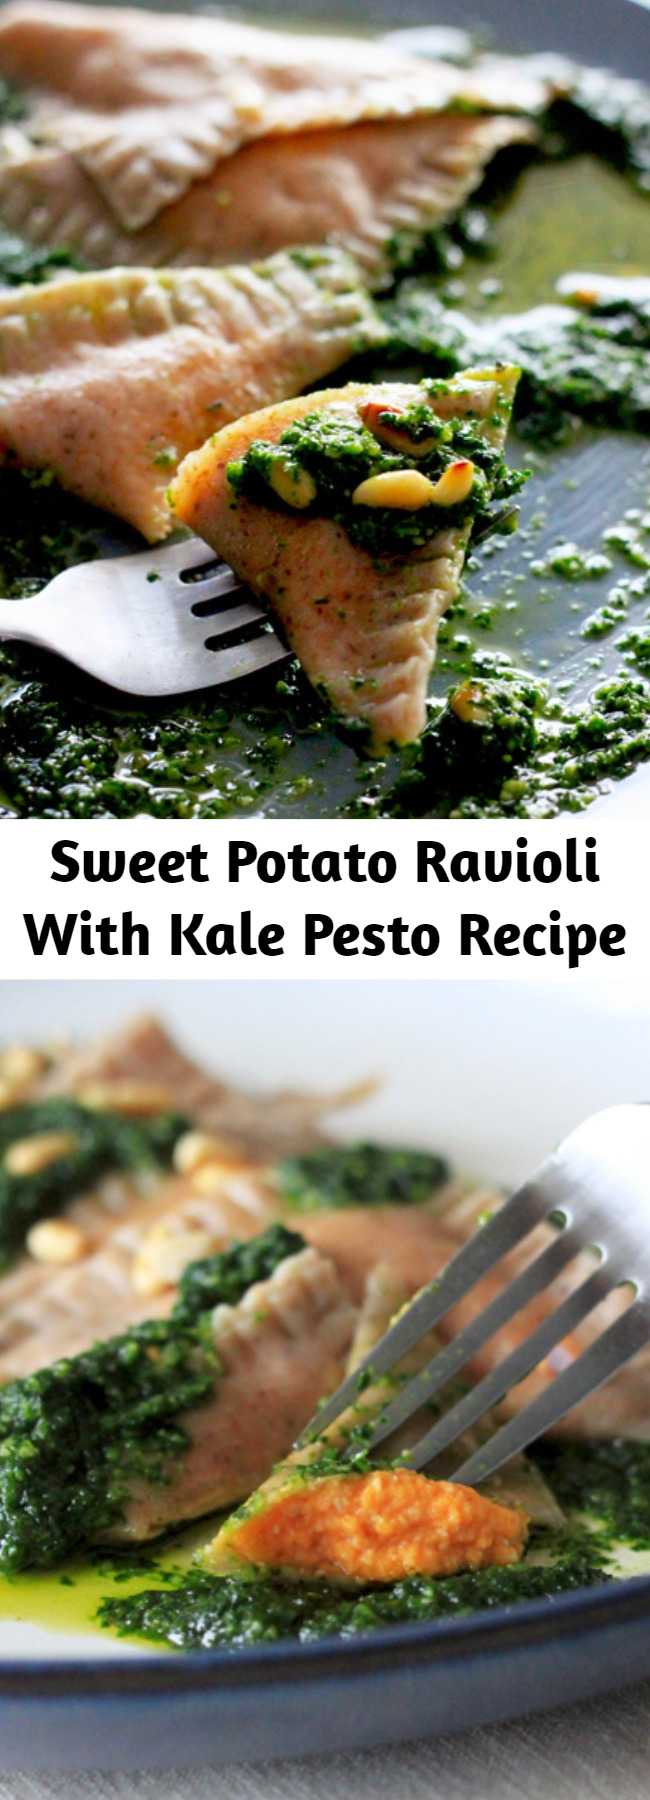 Sweet Potato Ravioli With Kale Pesto Recipe - This recipe uses a whole cup of pine nuts. I know they can be expensive, so feel free to swap in the nuts/seeds of your choosing (walnuts would be delicious). Most grocery stores carry decent quality fresh lasagna sheets in the refrigerated section if you don’t have a pasta roller at home (or don’t feel like making an extra hour of work for yourself). #healthy #dinner #recipe